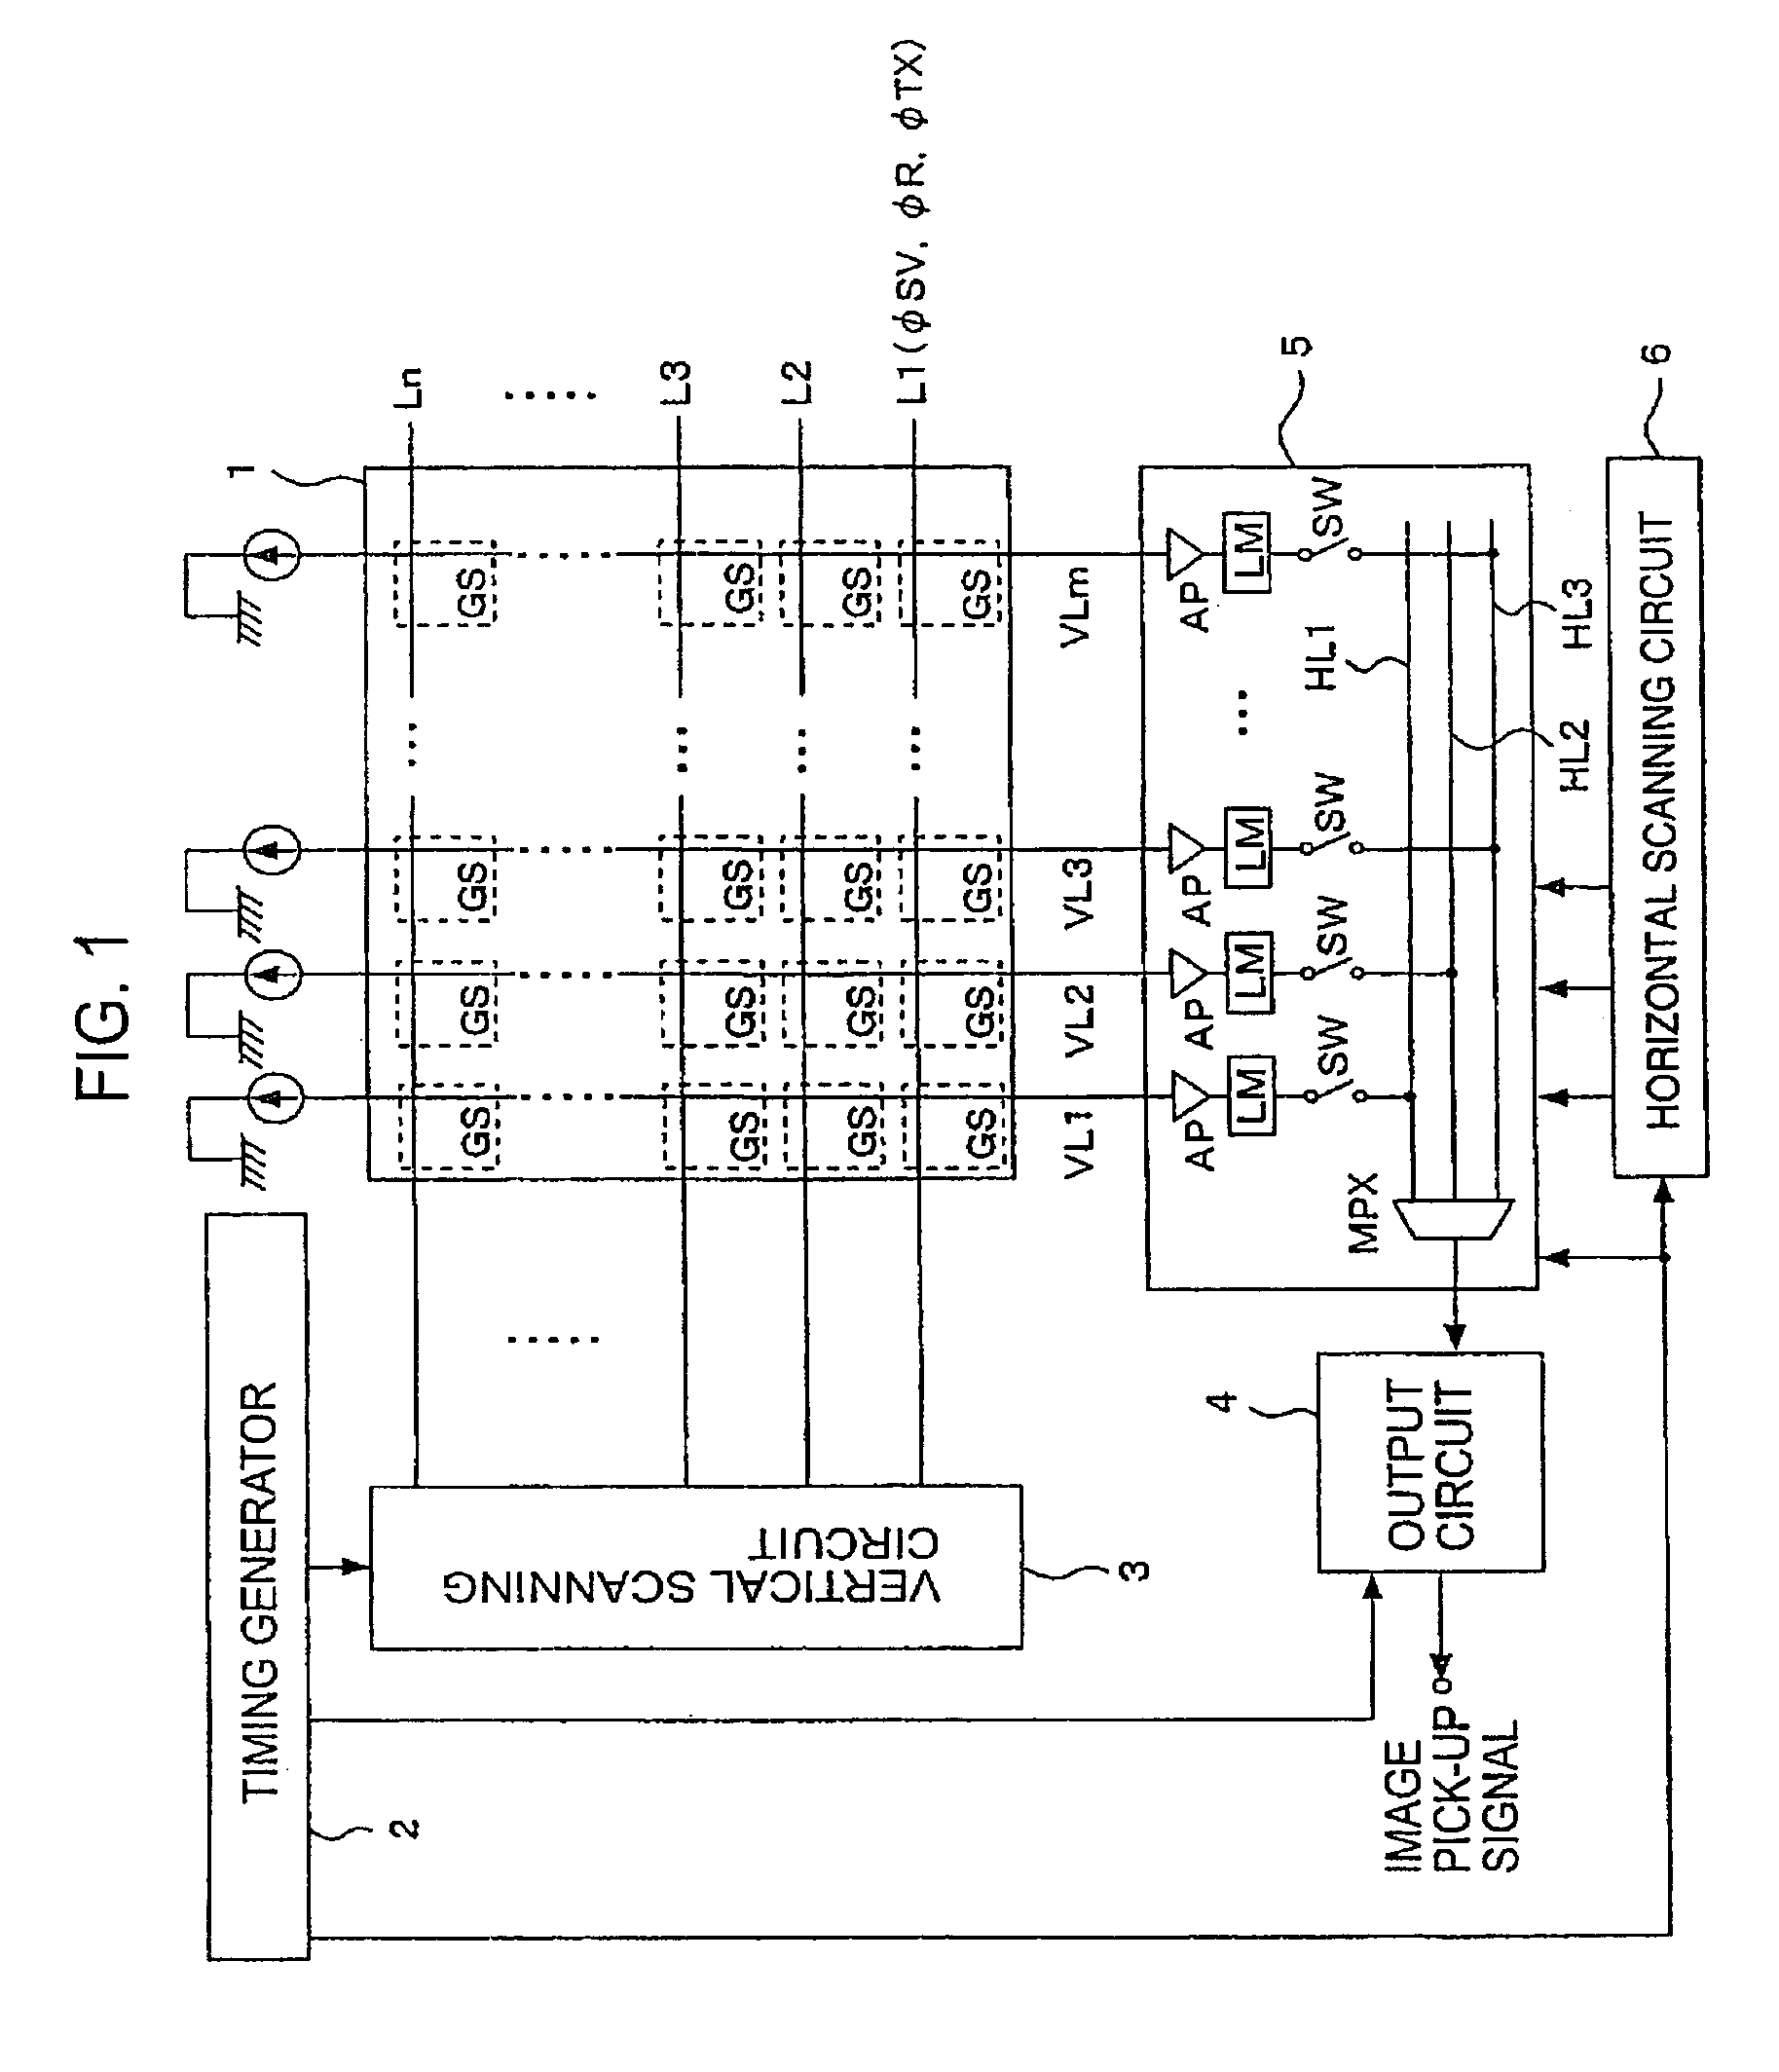 Solid-state image-pickup device with column-line amplifiers and limiters